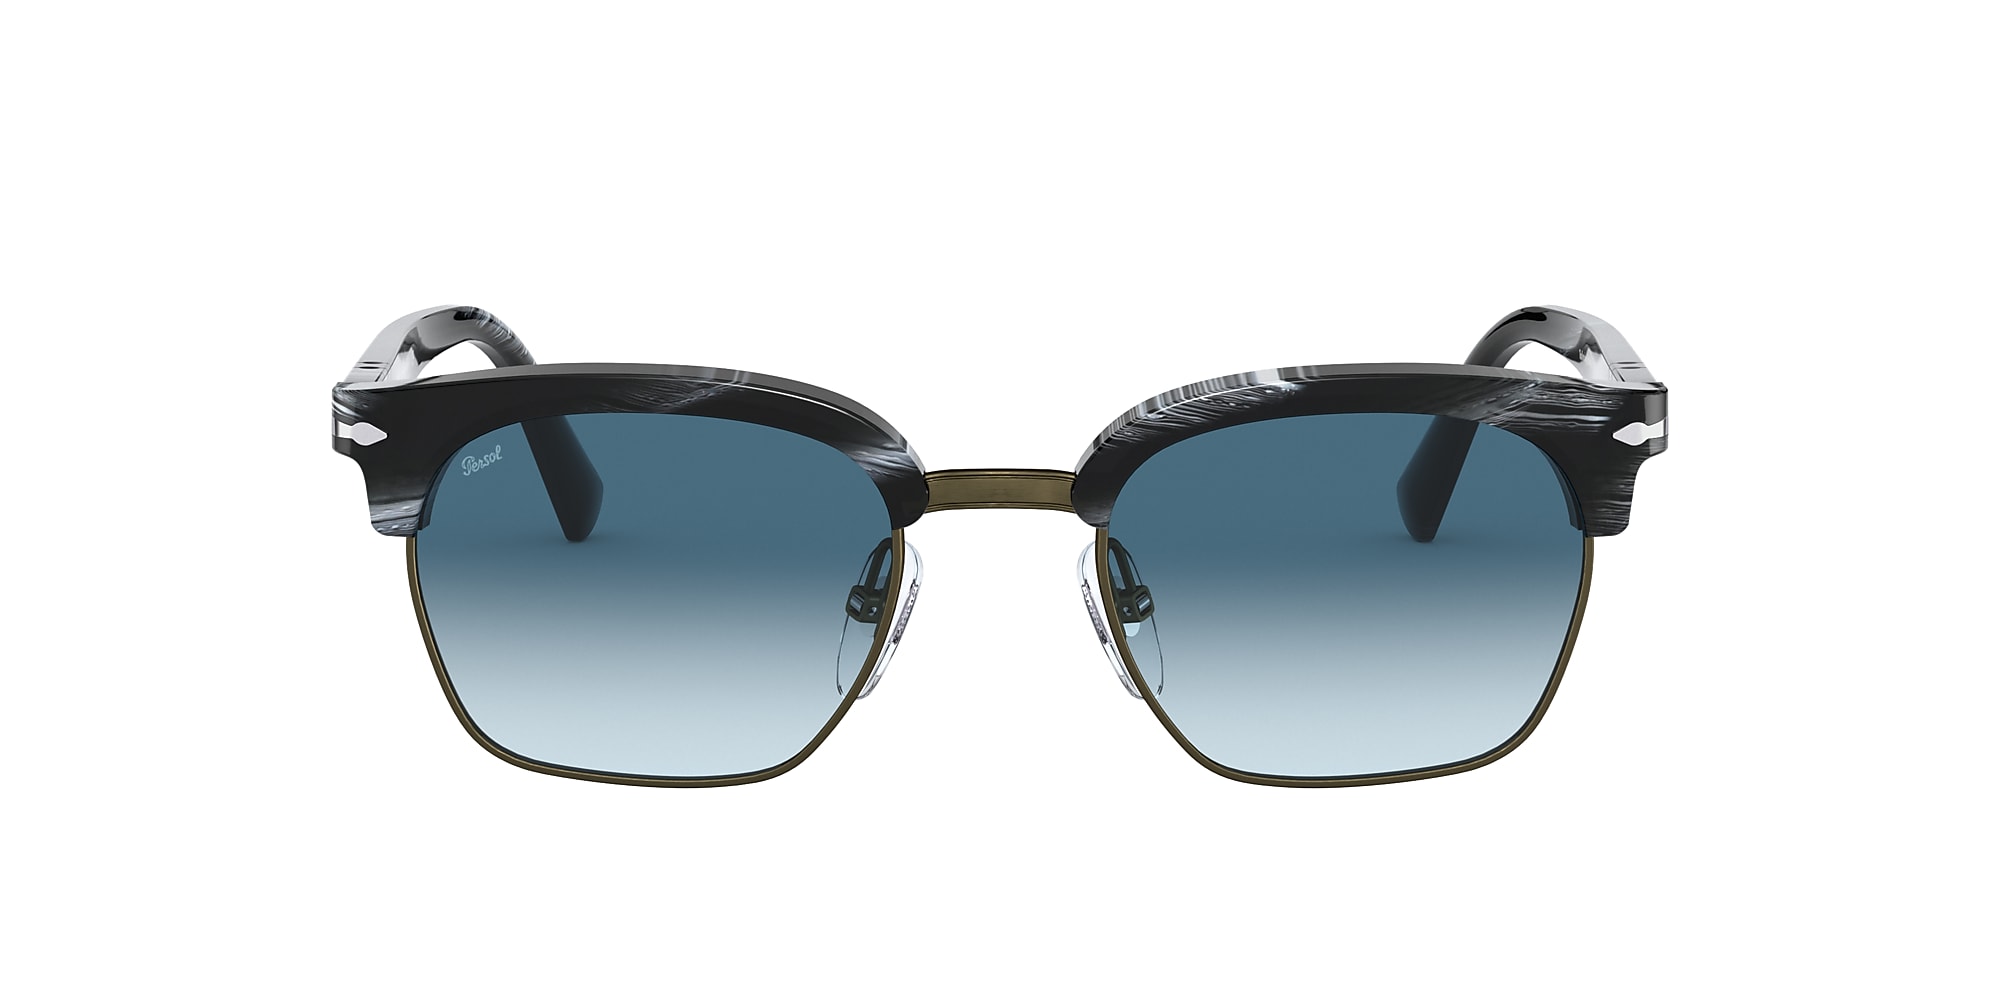 Persol product image